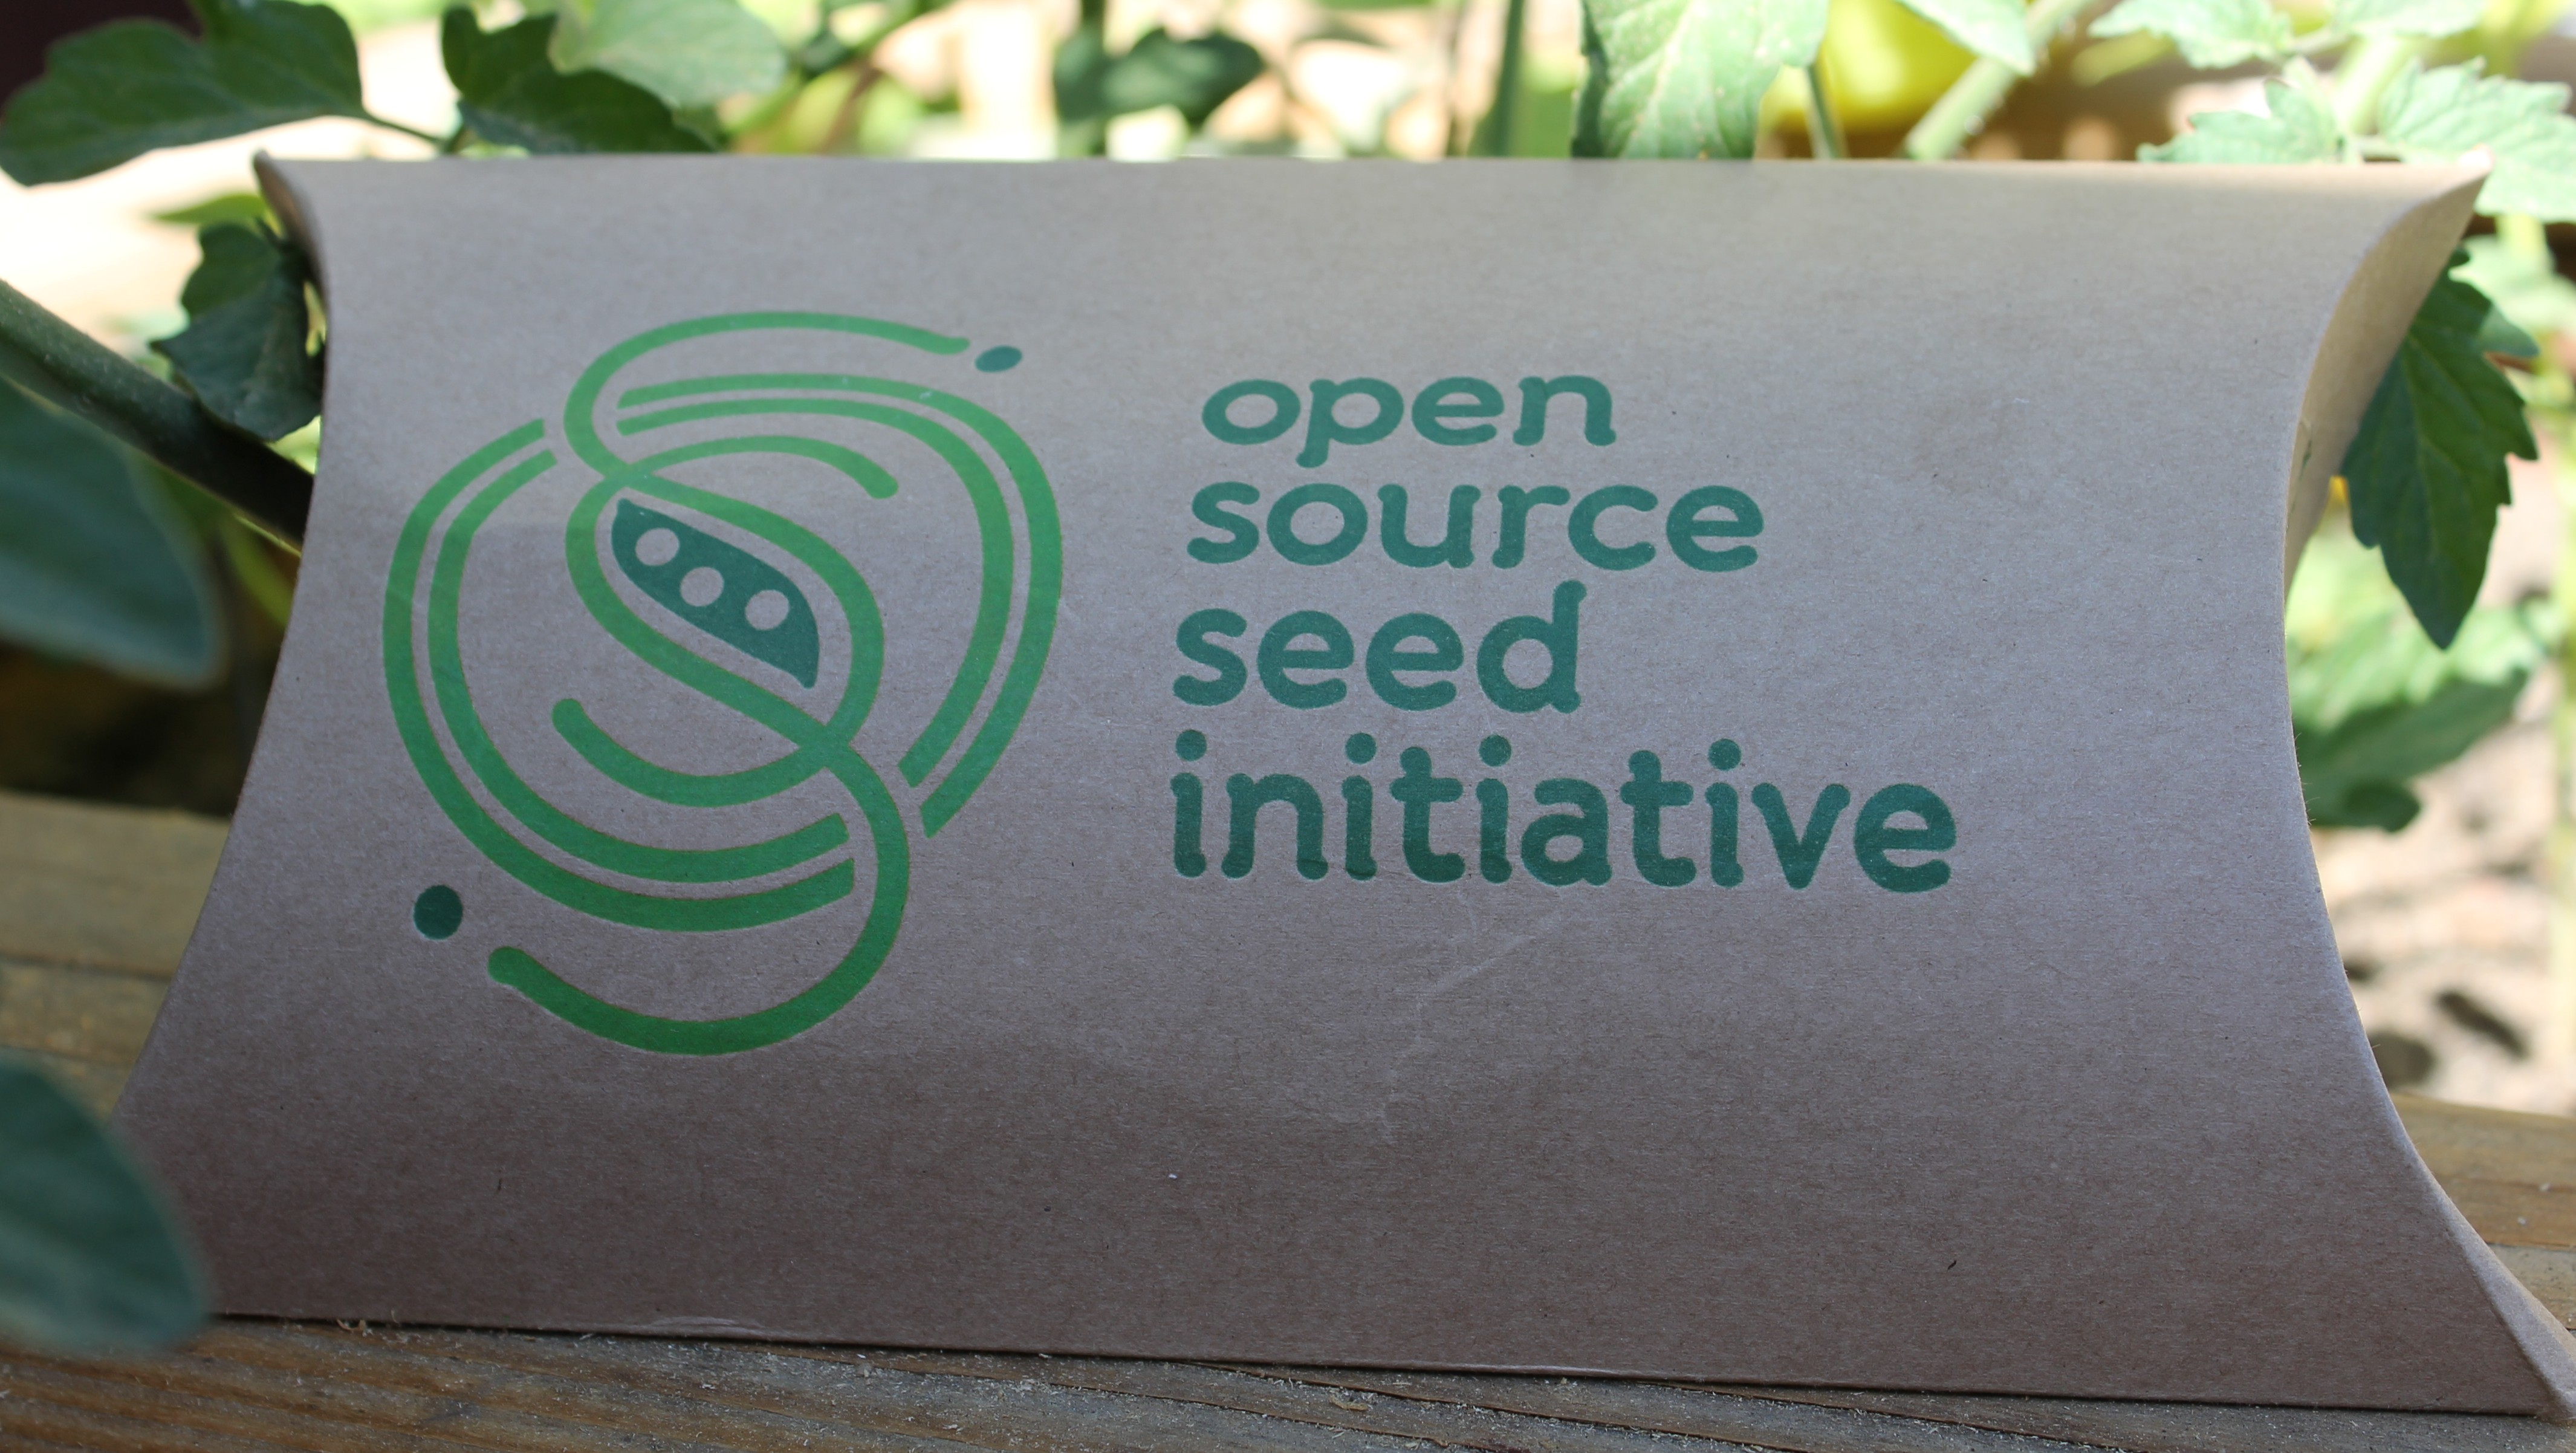 Open Source Seed Initiative